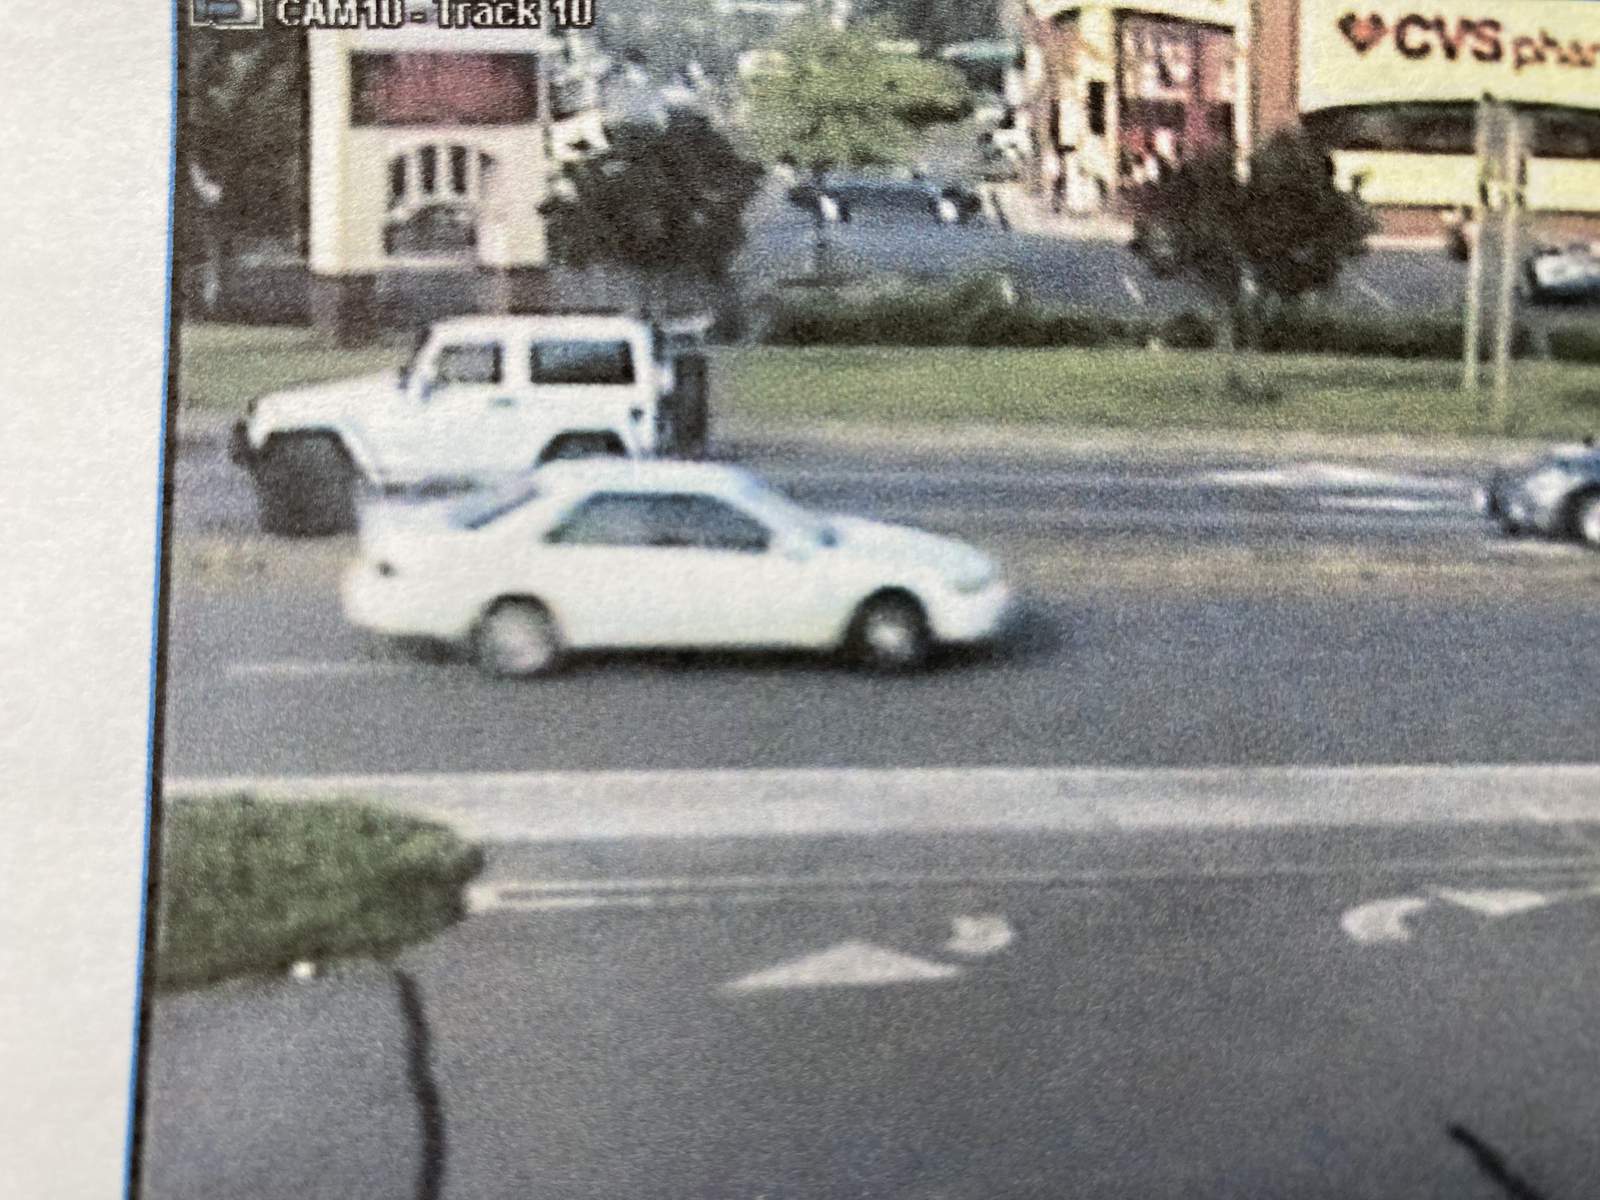 Roanoke County police investigate a hit-and-run at the intersection of Plantation Road and Williamson Road